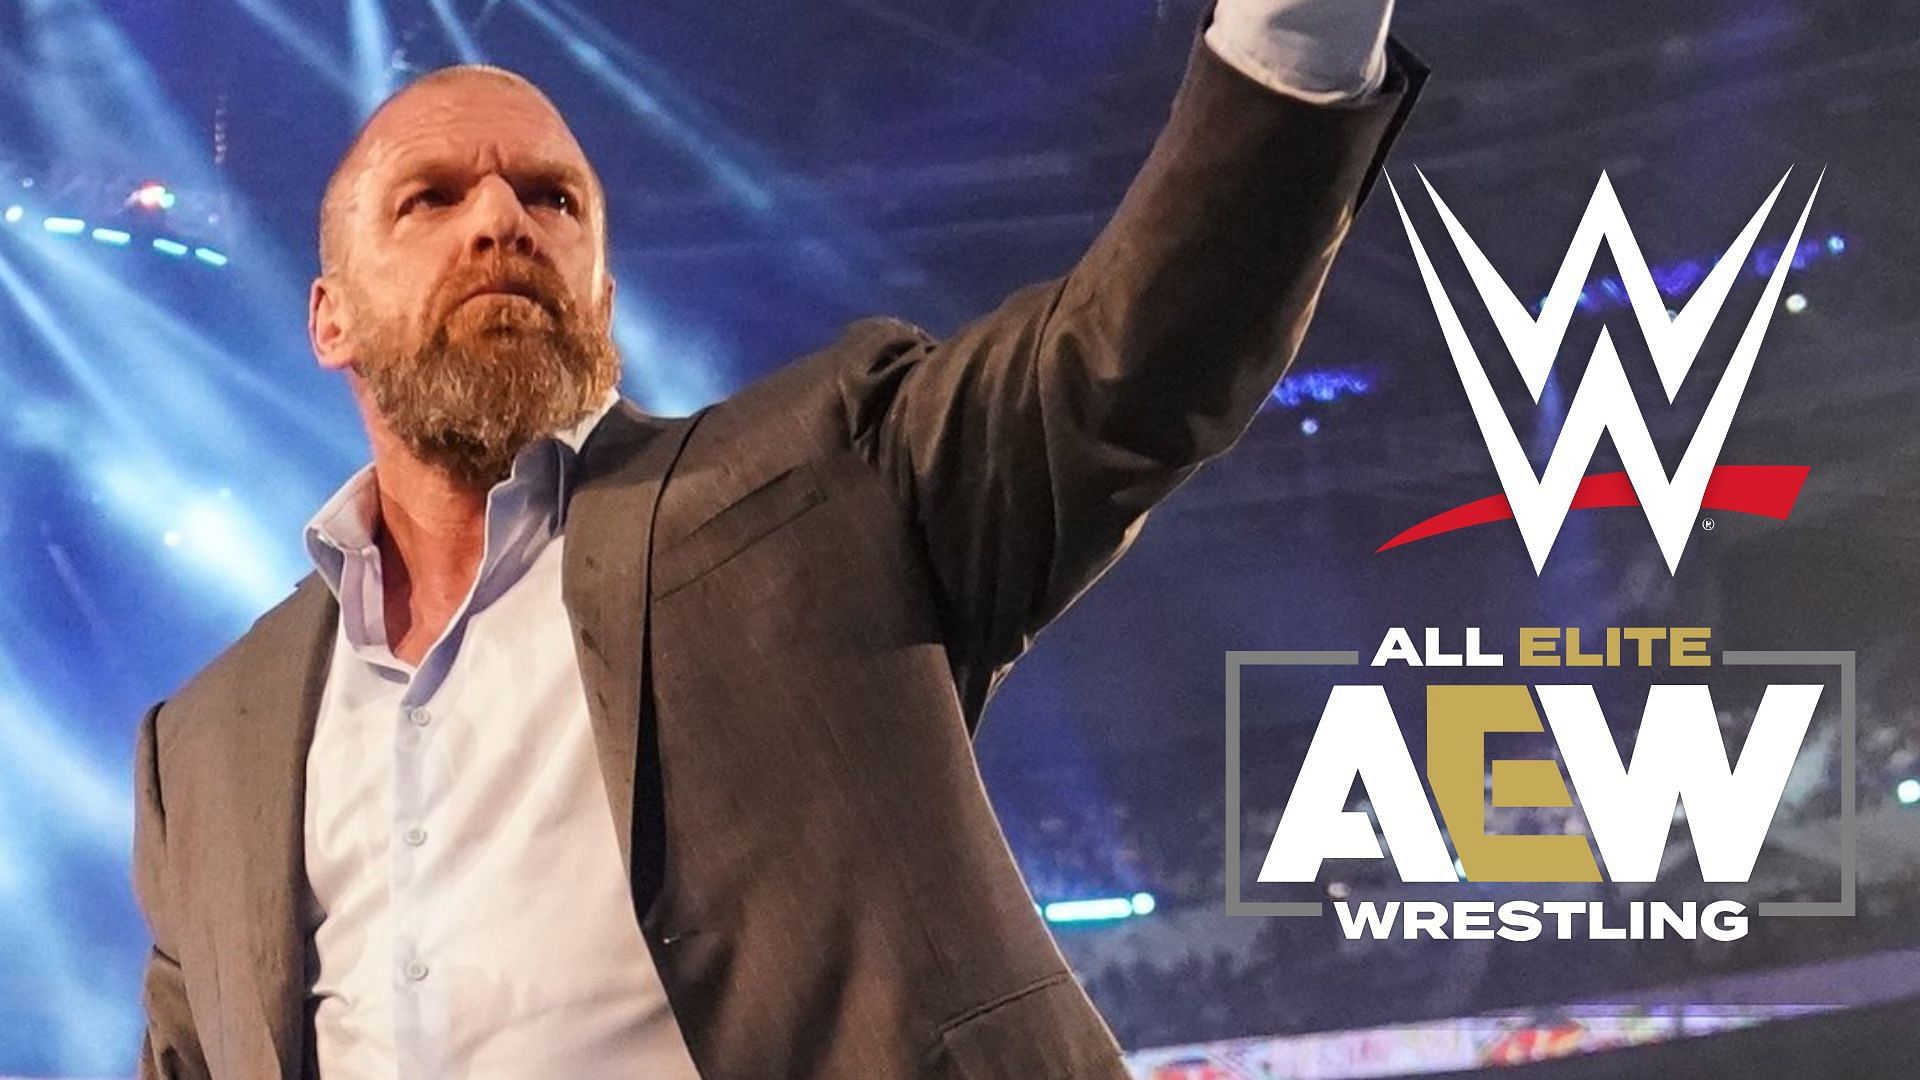 Triple H has managed to bring an AEW star to WWE